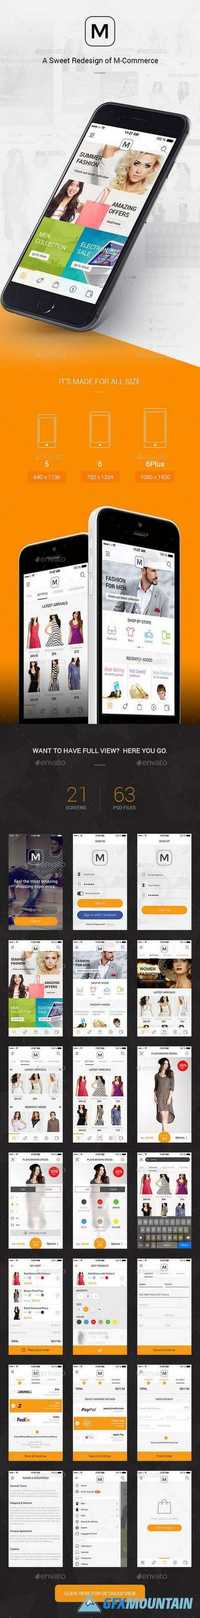 GraphicRiver - M - A Sweet Redesign Of M-Commerce 11357381